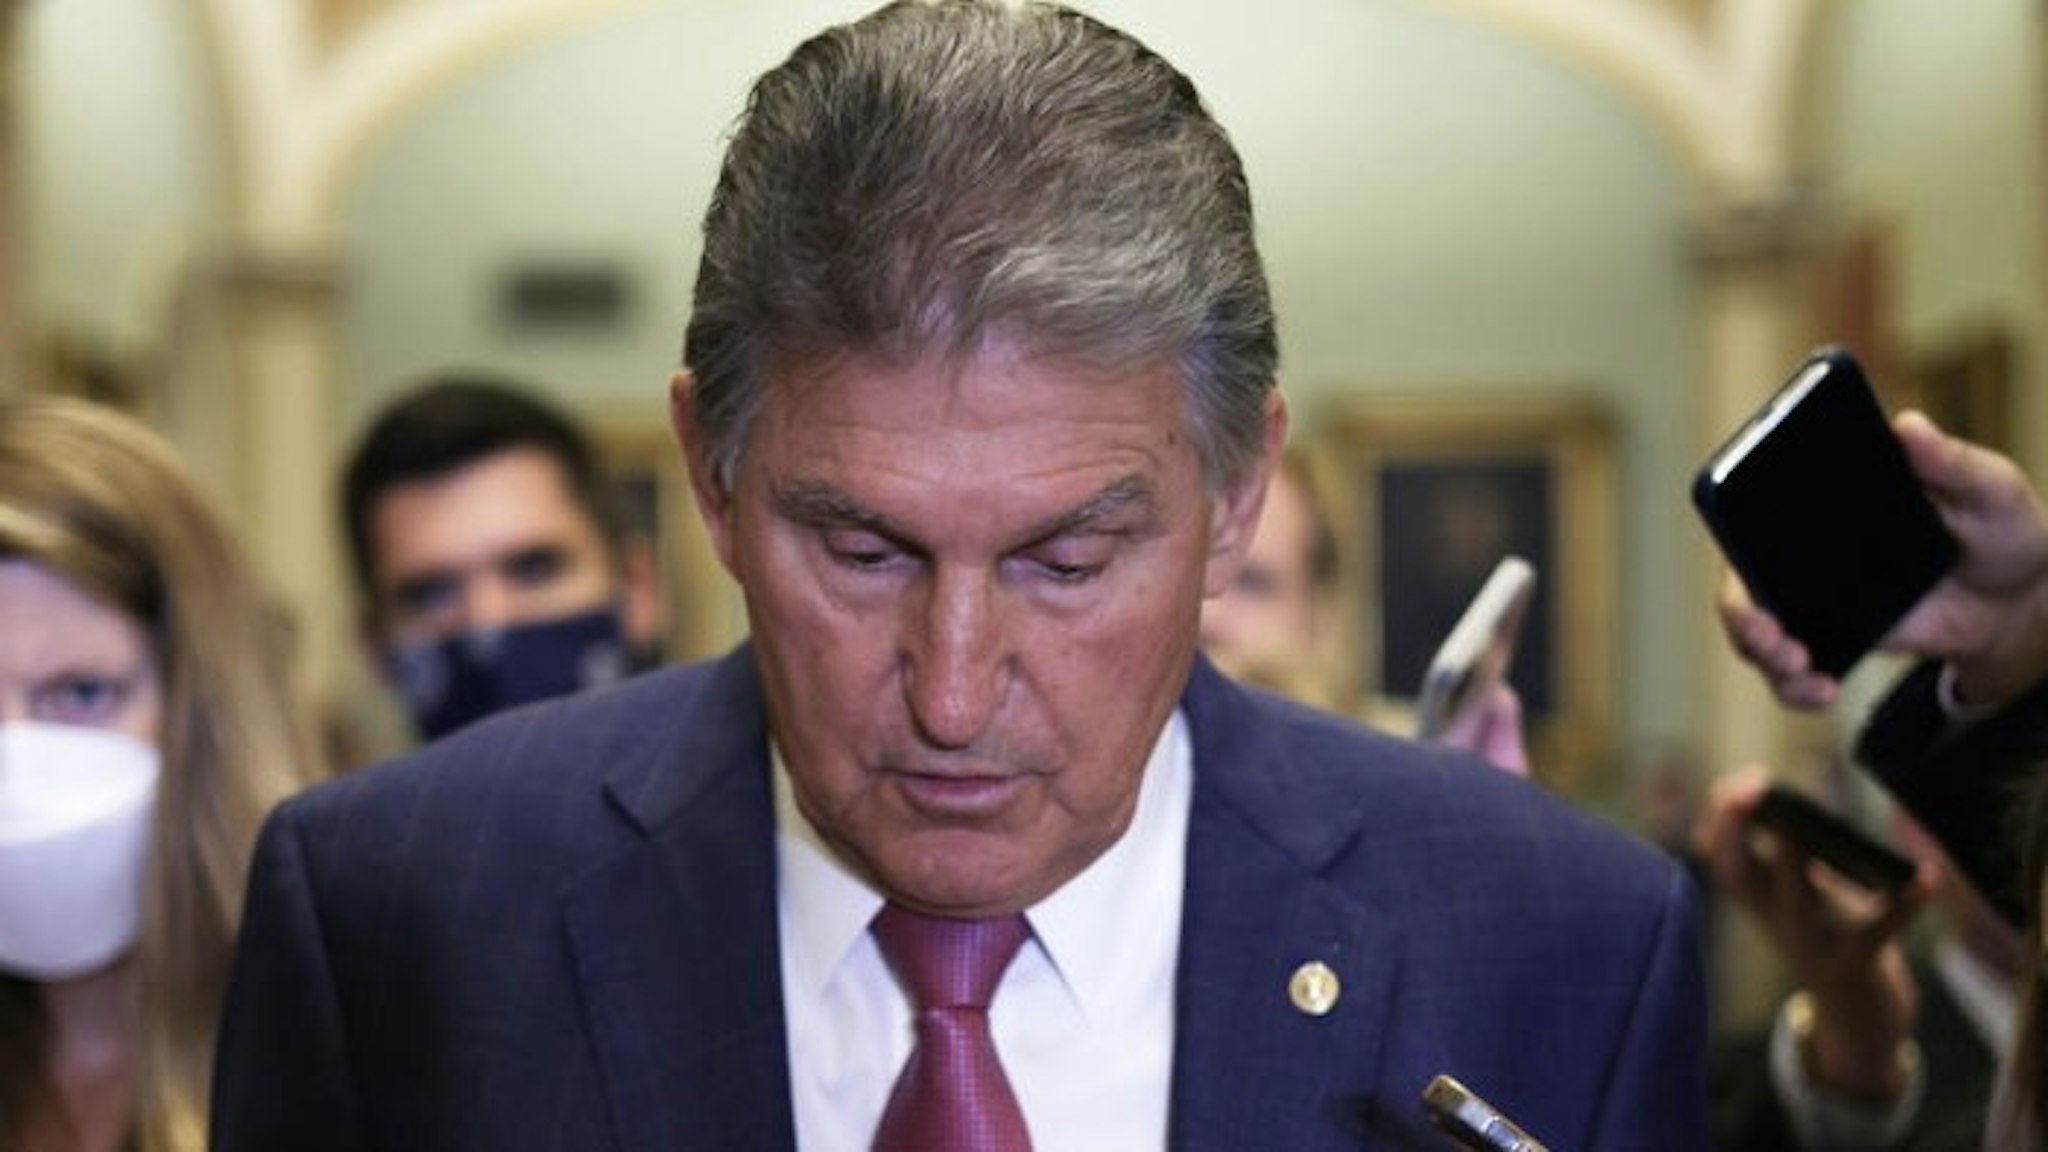 Senators Meet For Weekly Policy Luncheons On Capitol Hill WASHINGTON, DC - JULY 27: U.S. Sen. Joe Manchin (D-WV) (C) speaks to members of the press after a weekly Senate Democratic Policy Luncheon at the U.S. Capitol on July 27, 2021 in Washington, DC. Senate Democrats held a weekly policy luncheon to discuss the Democratic agenda. (Photo by Alex Wong/Getty Images) Alex Wong / Staff via Getty Images